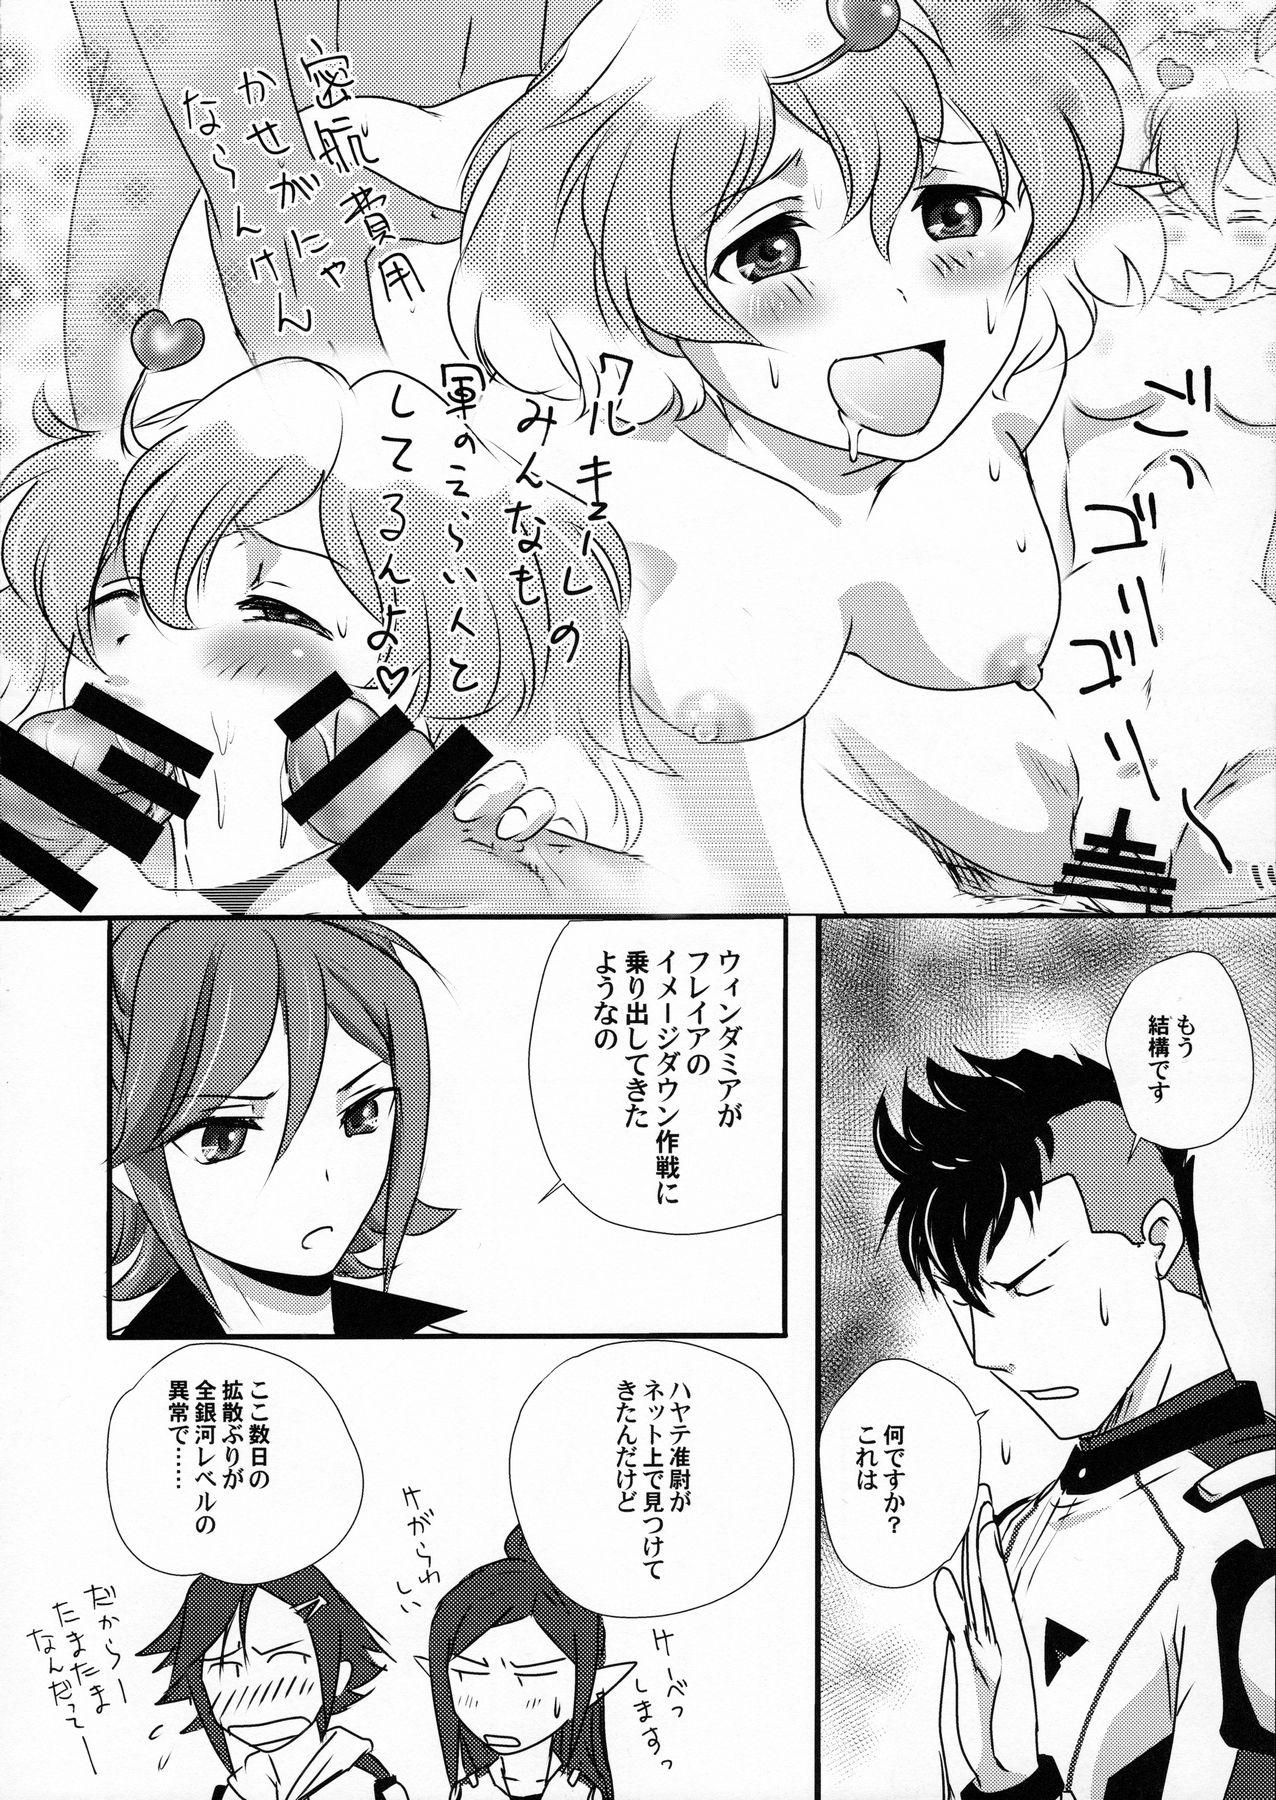 Shemale E-OPP@i Δ - Macross delta Stepbrother - Page 6